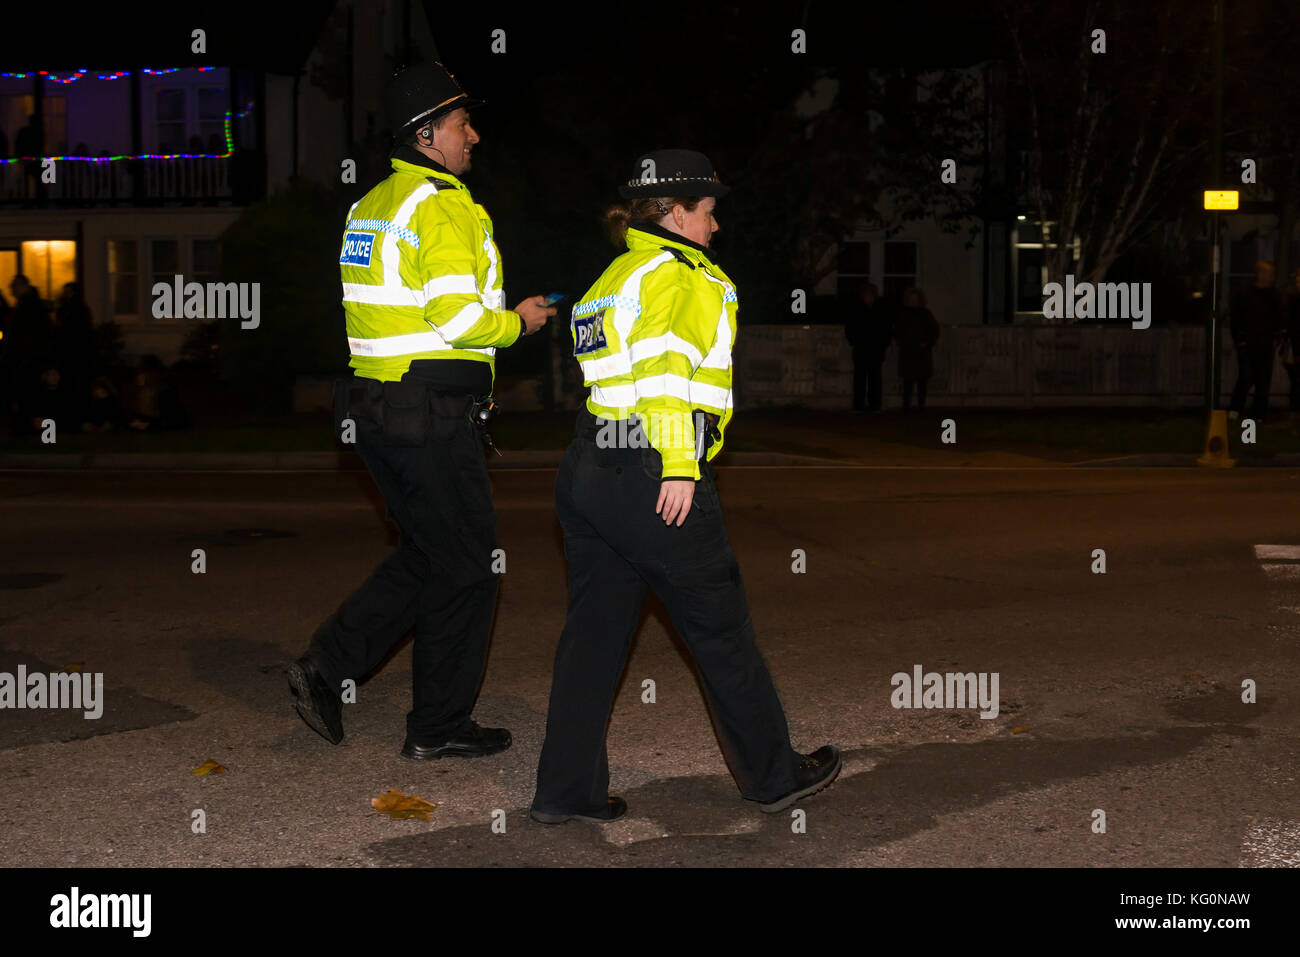 Pair of police officers patrolling at a night time event in the UK. Stock Photo